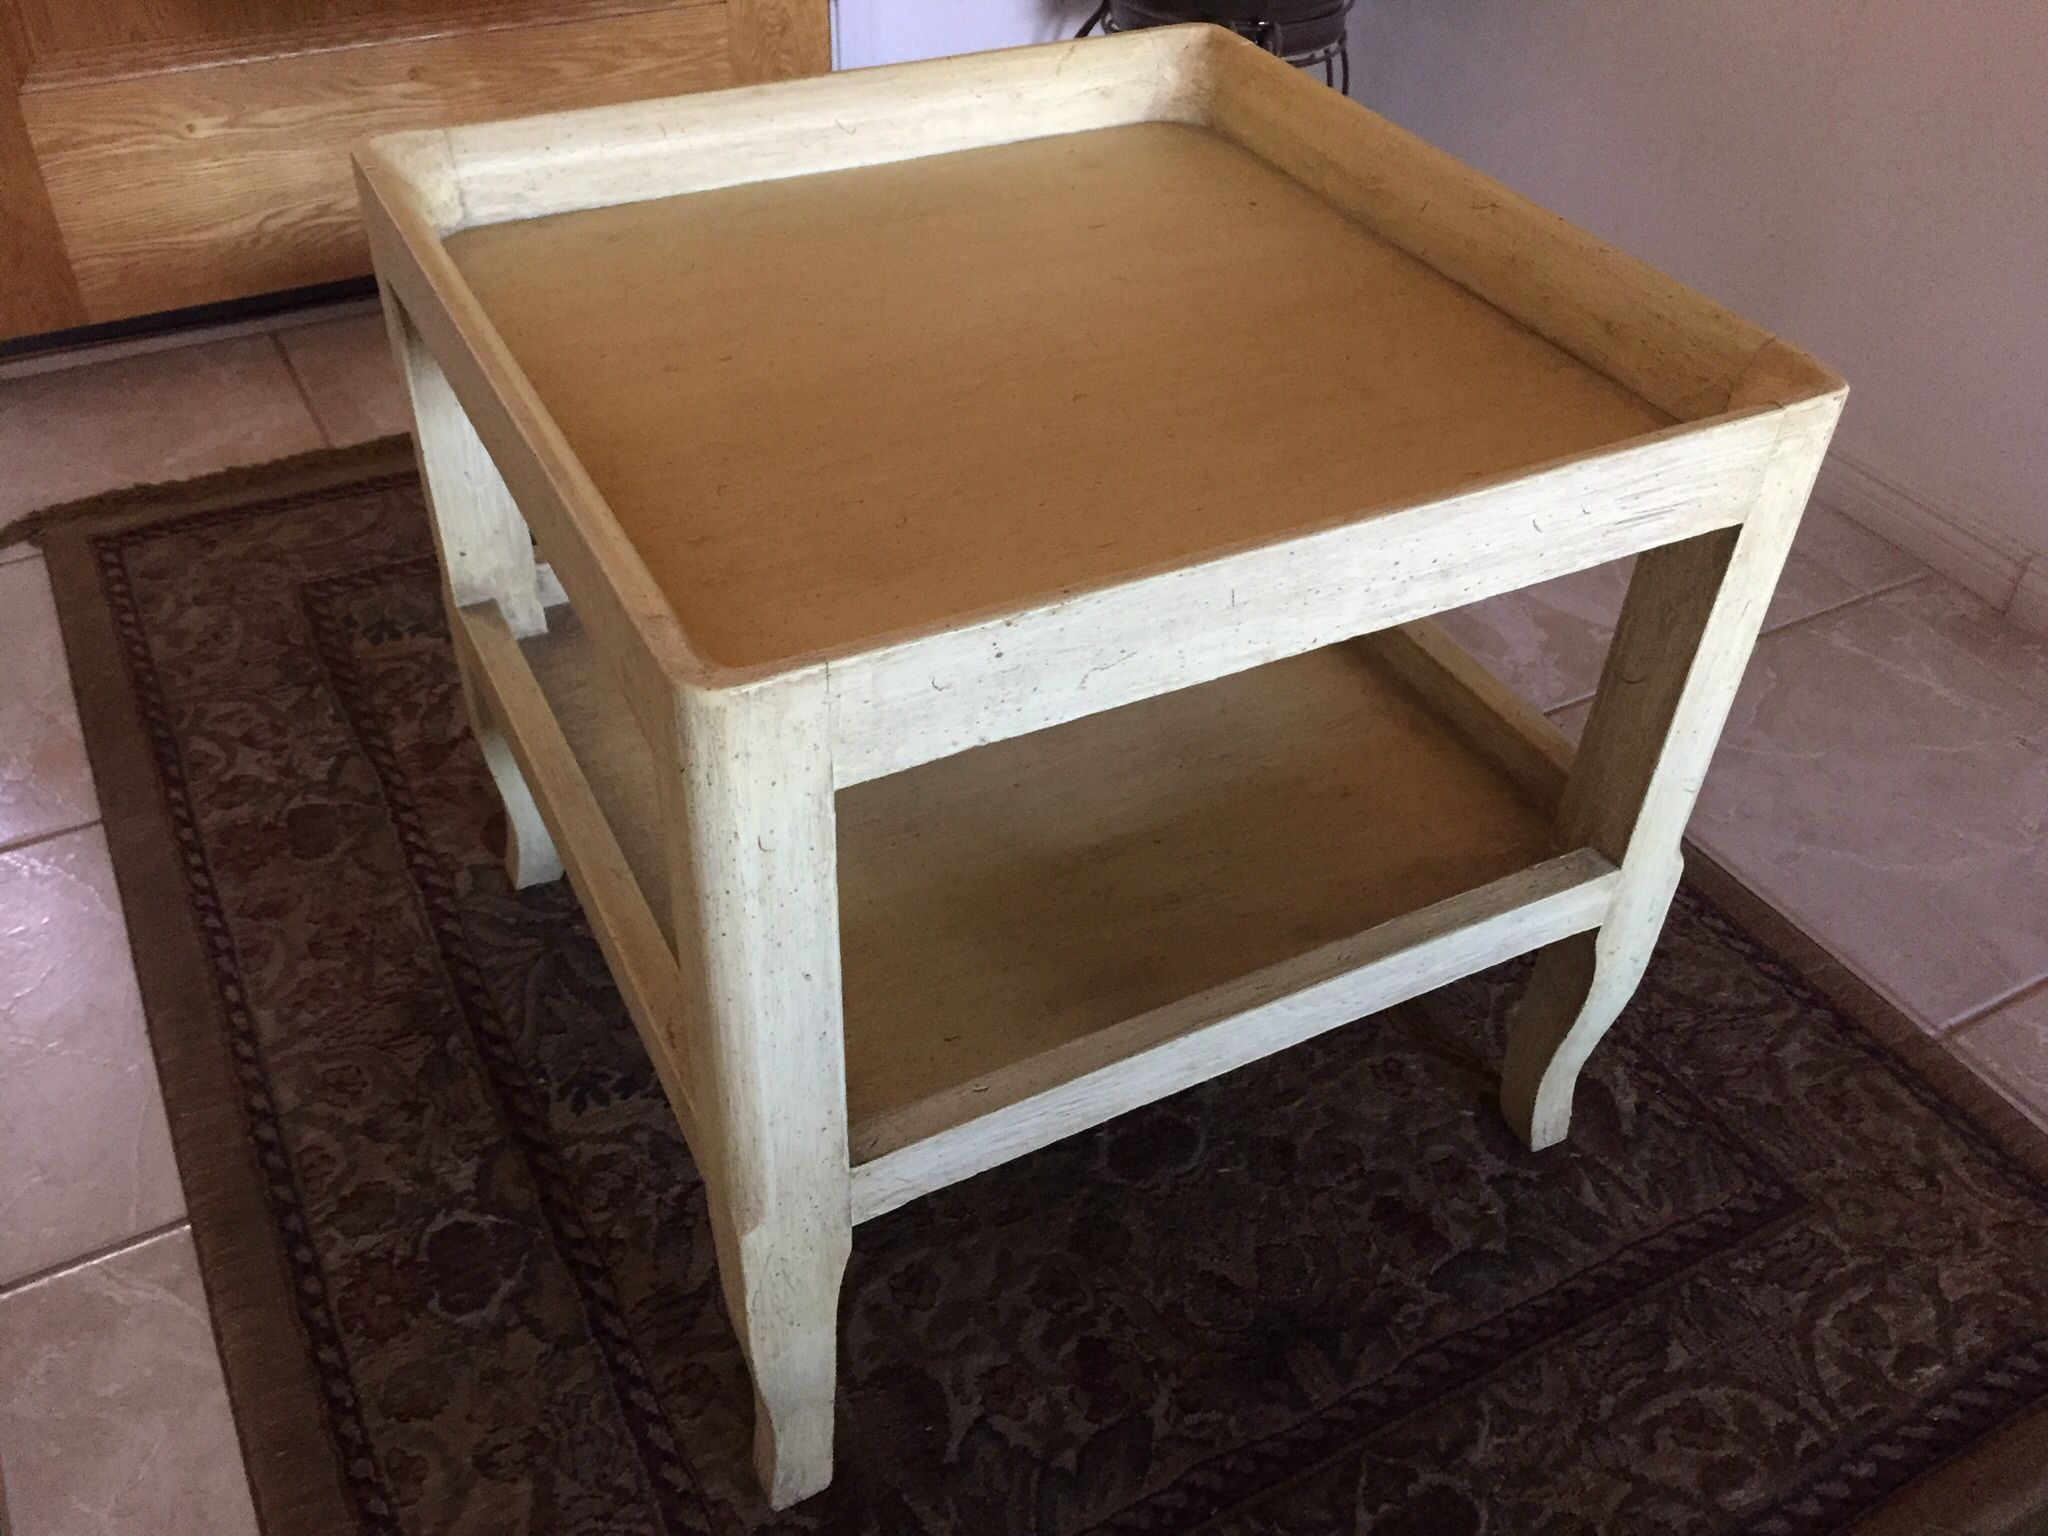 Wooden end table 